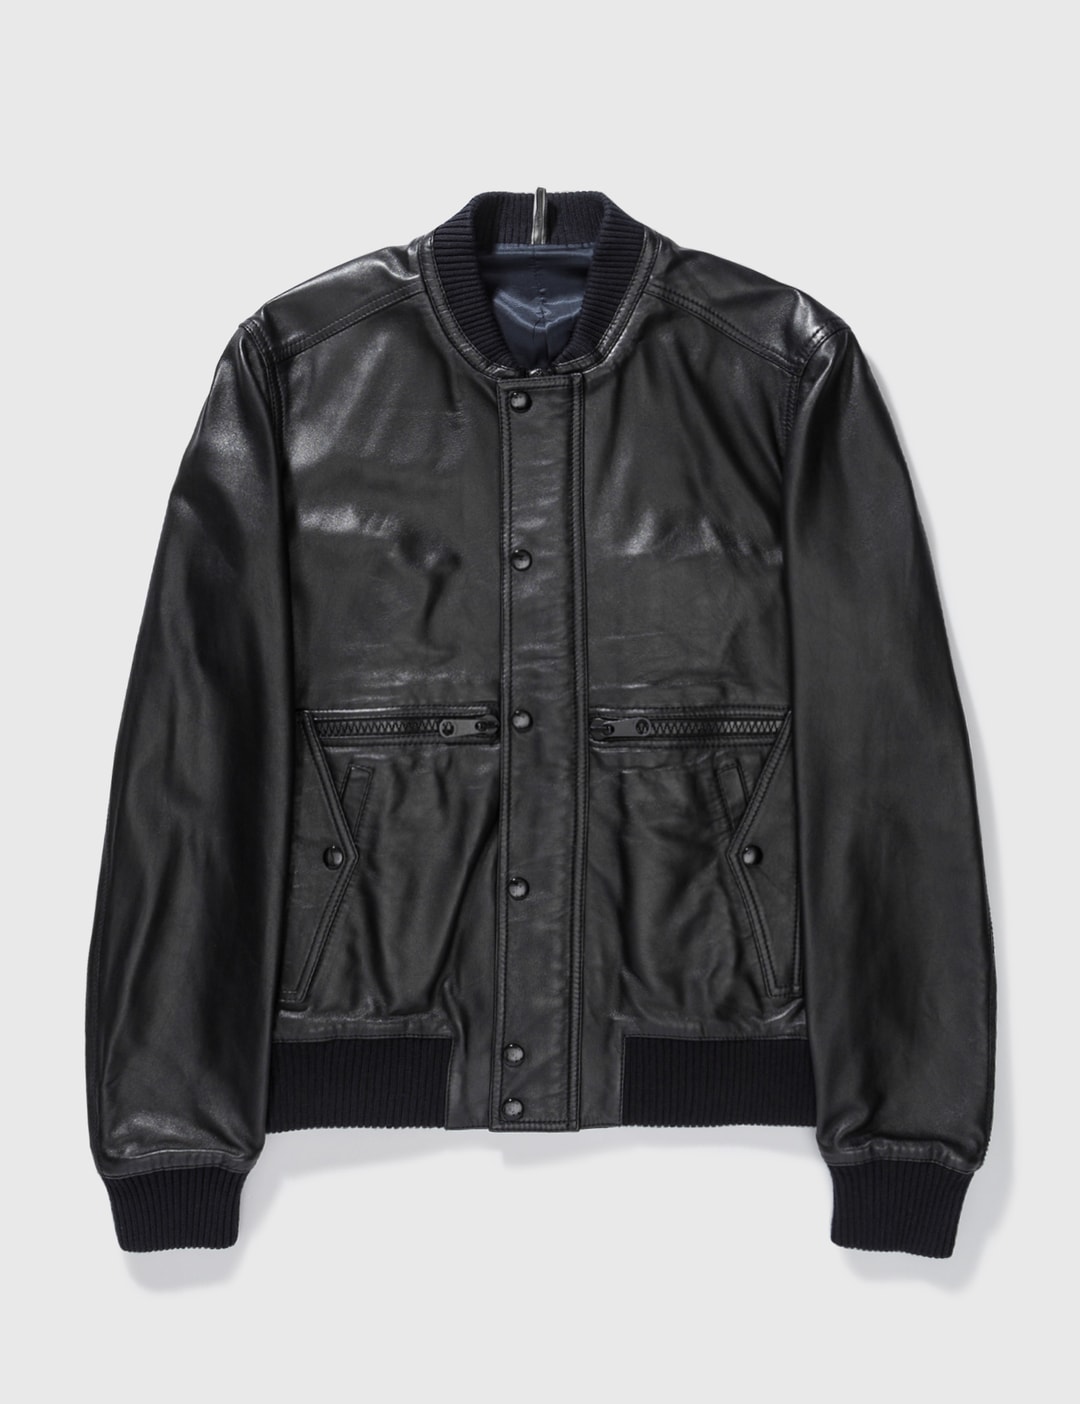 Dior - Dior Leather Jacket | HBX - Globally Curated Fashion and ...